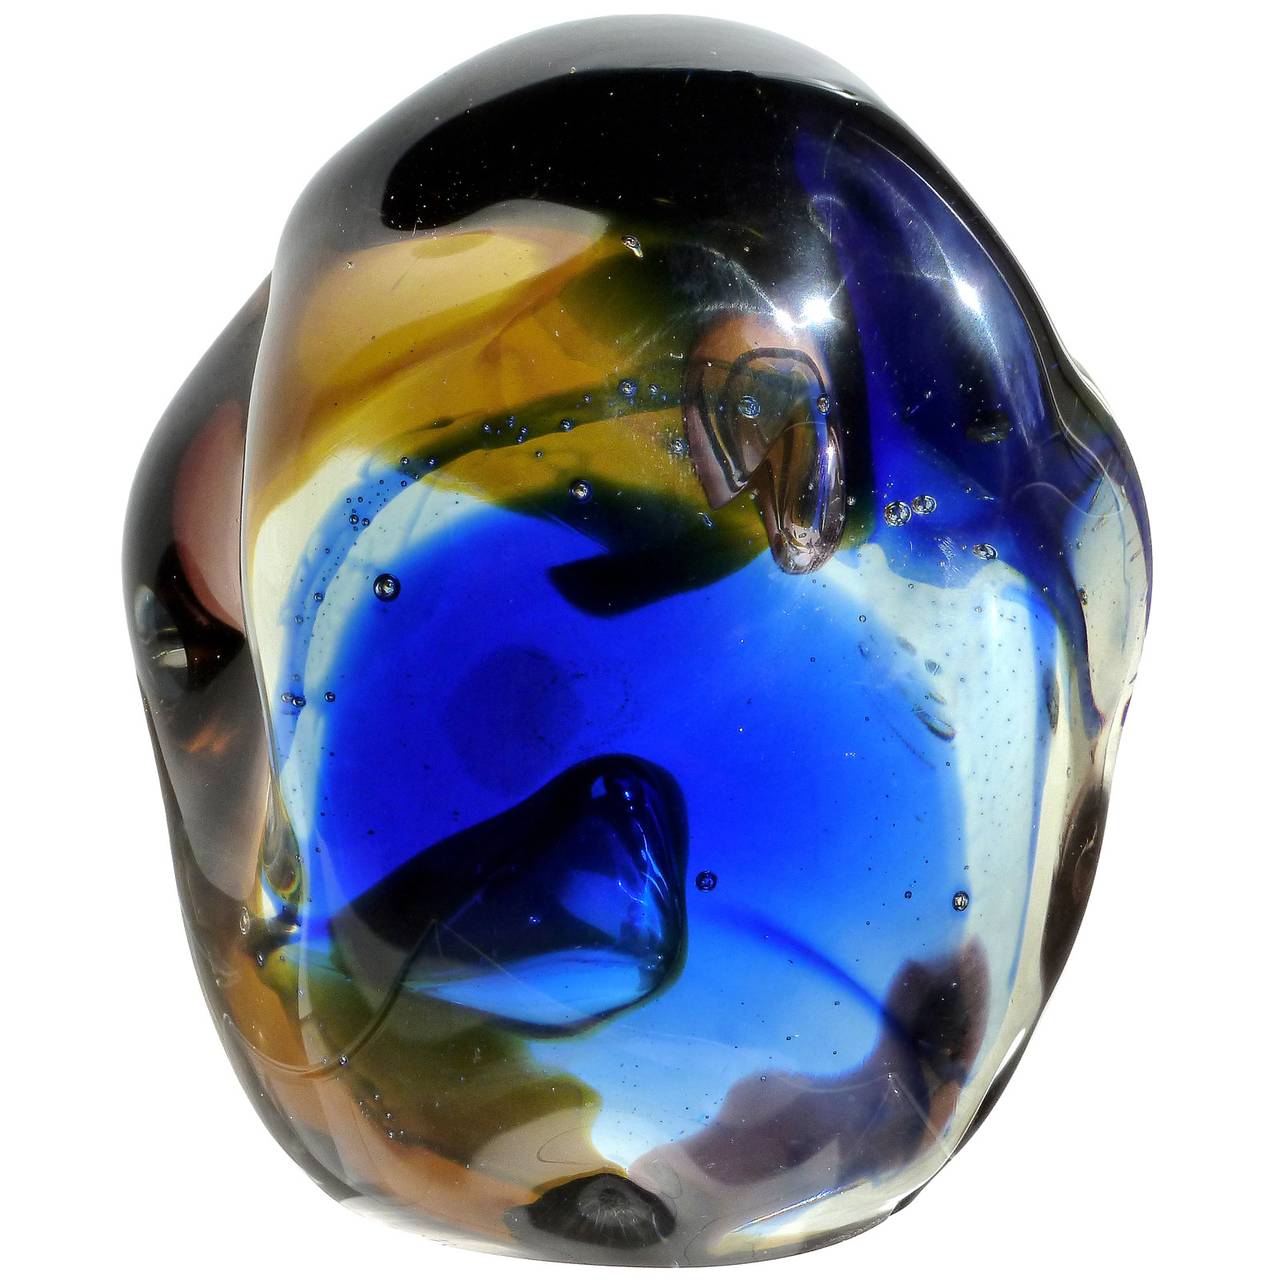 FREE Shipping Worldwide! See details below description.

Rare, large and heavy Murano hand blown biomophic orange, amethyst, and cobalt blue art glass rock shaped sculpture. Documented to the Salviati company, signed 